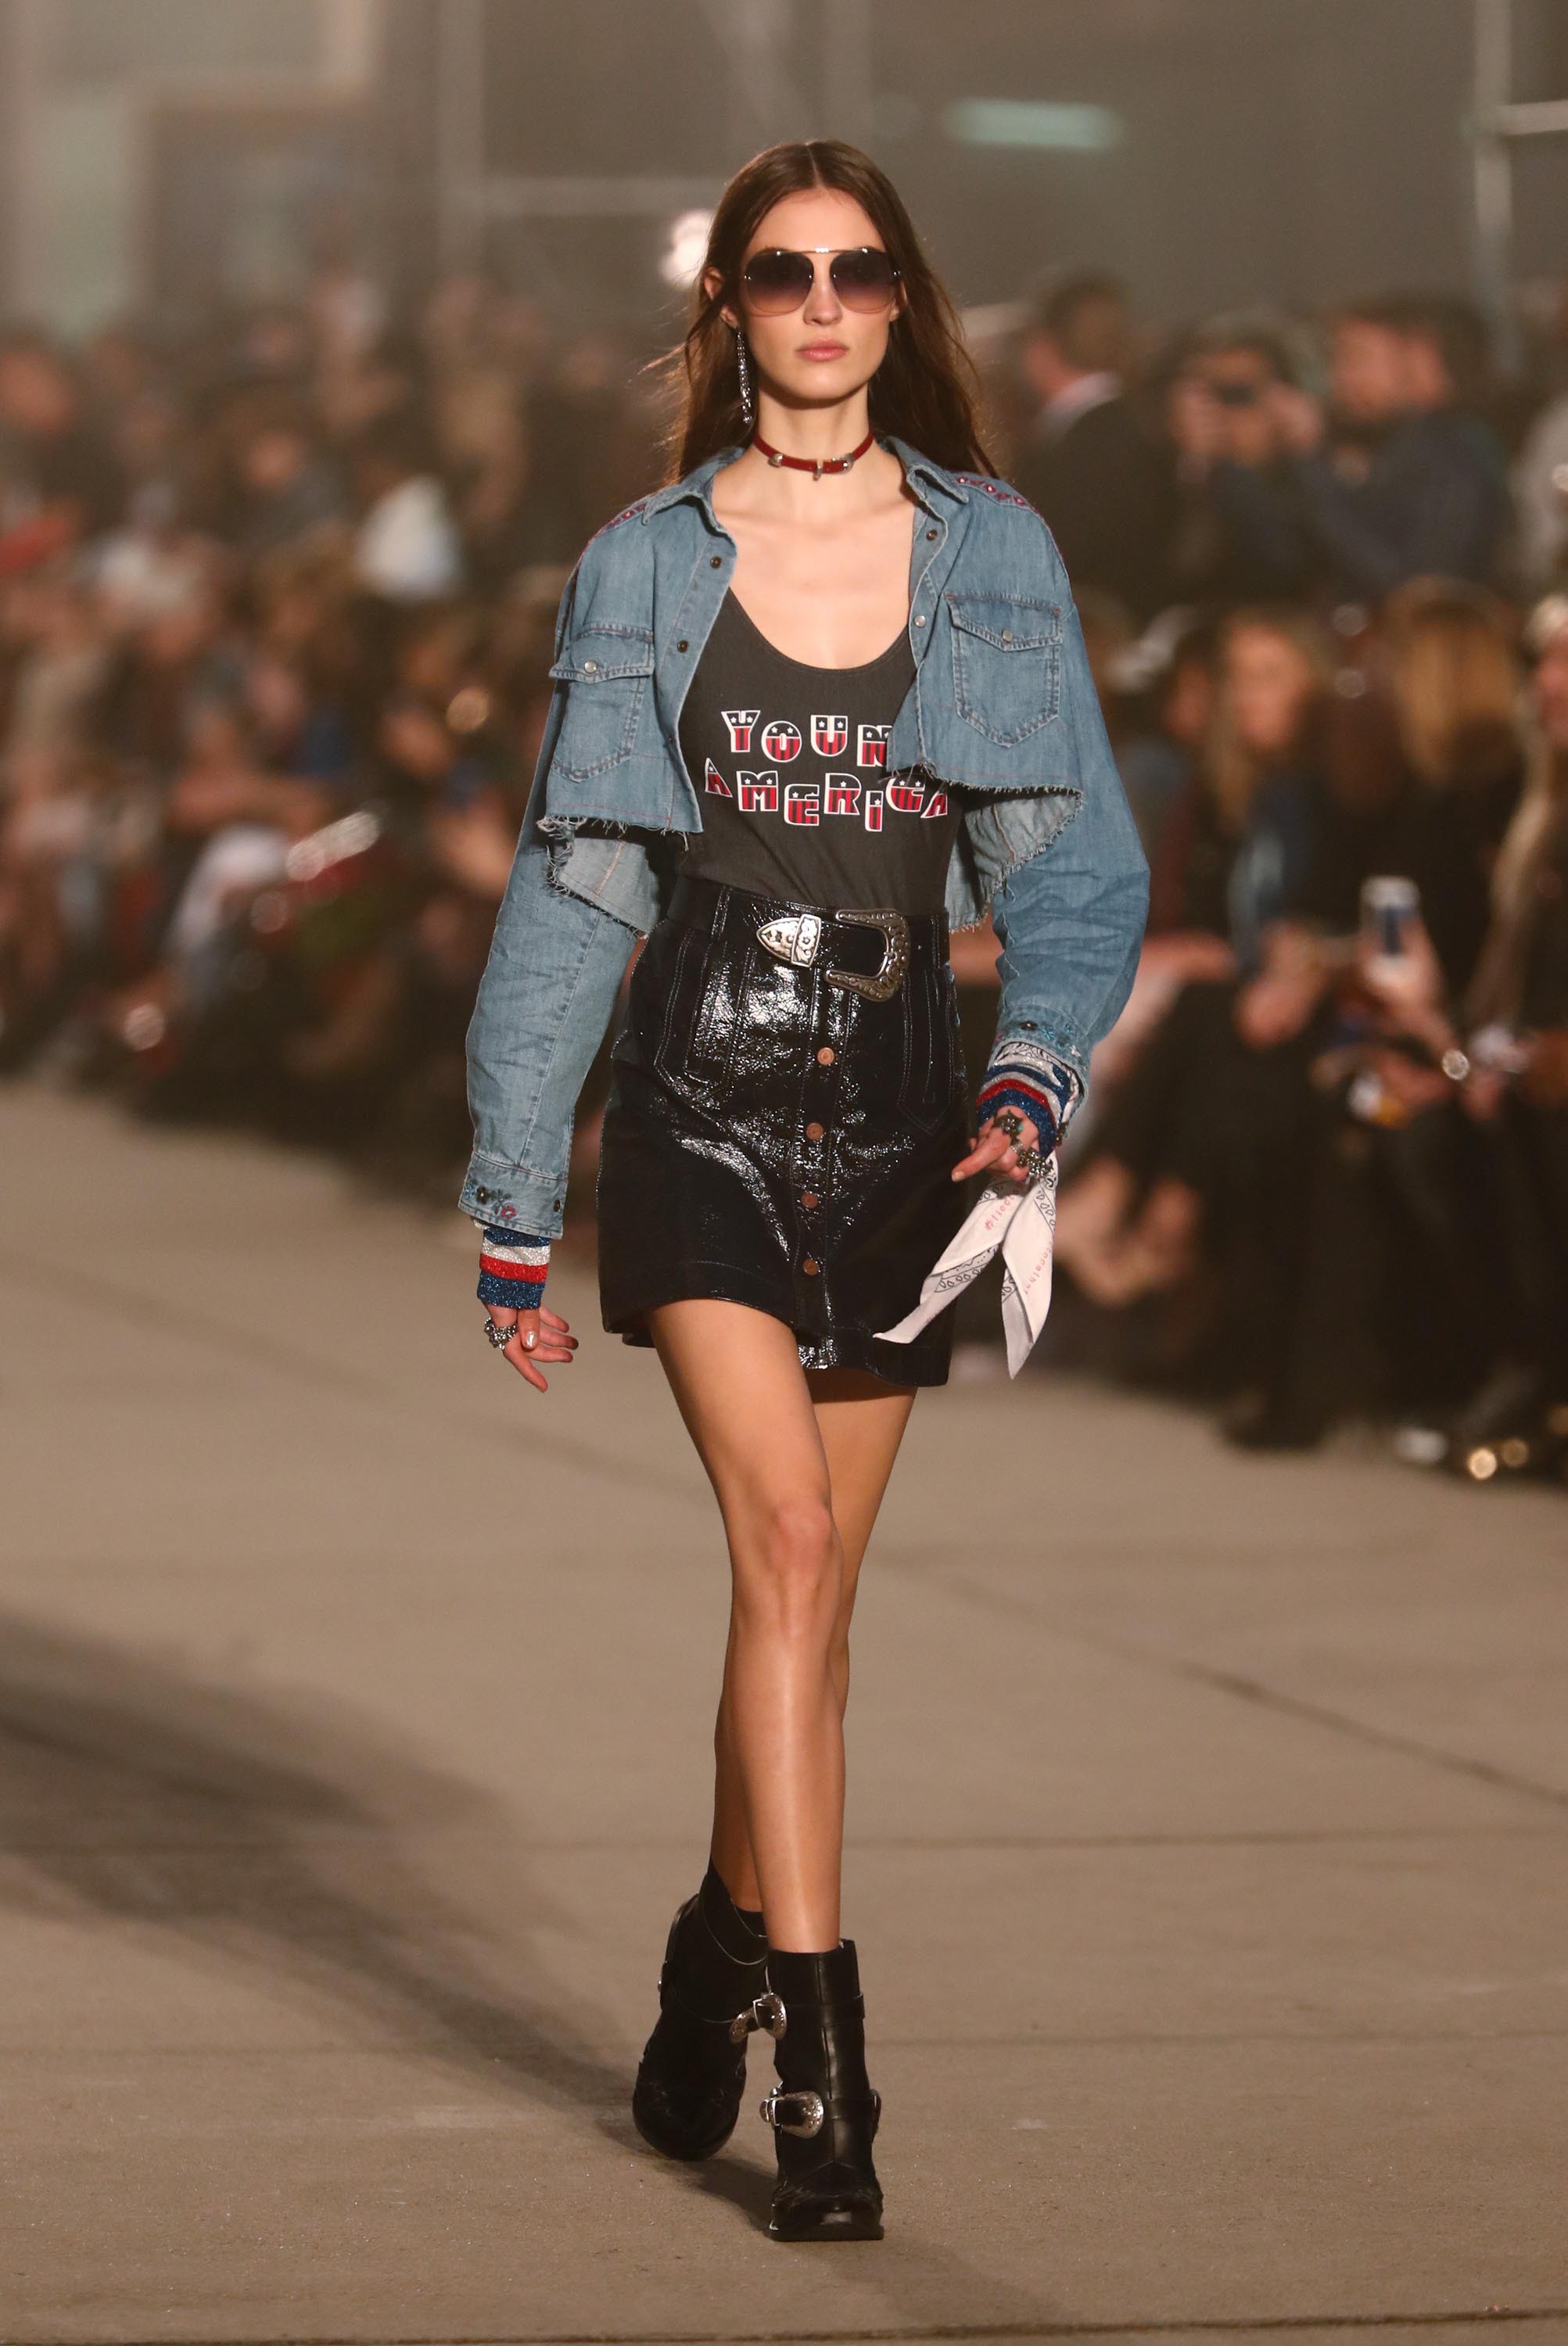 Camille Hurel walks the runway at the TommyLand Tommy Hilfiger Spring 2017 Fashion Show